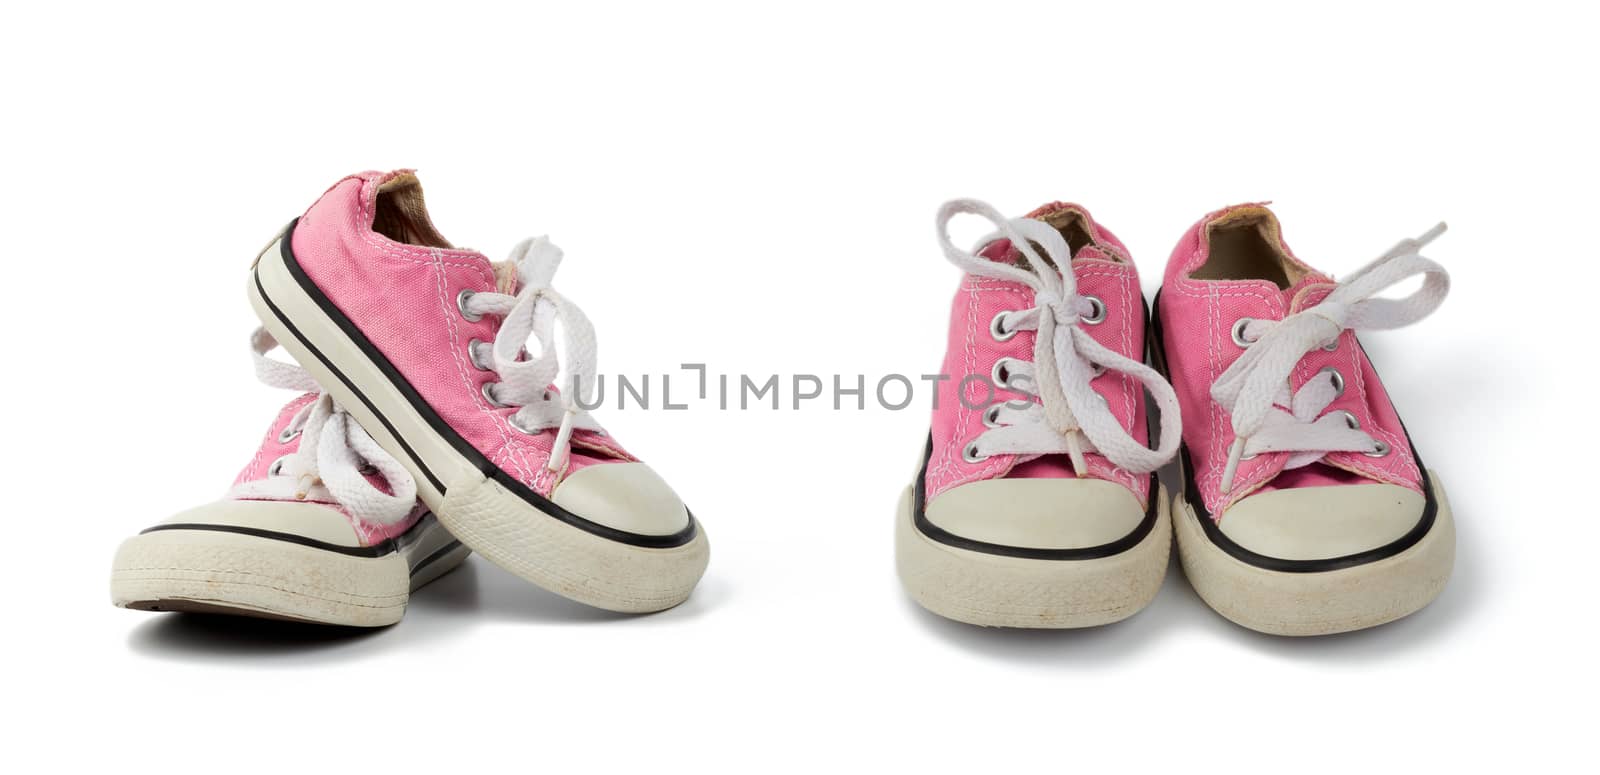 pair of pink children's textile sneakers with white laces isolated on a white background, old shoes, set